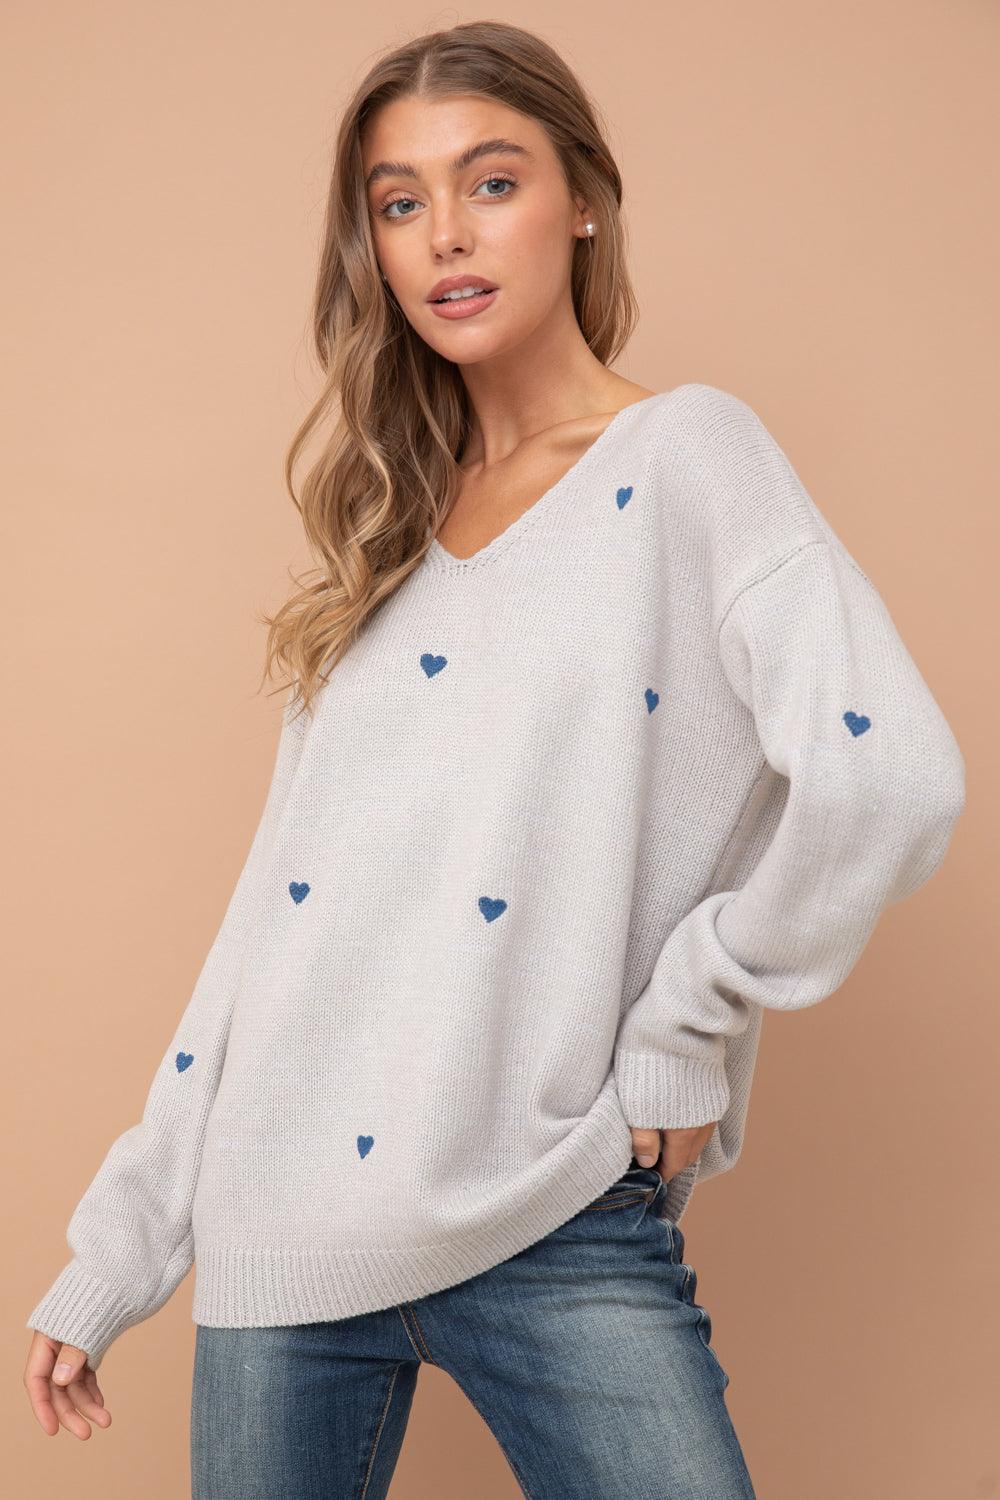 Penny Heart Sweater - Strawberry Moon Boutique